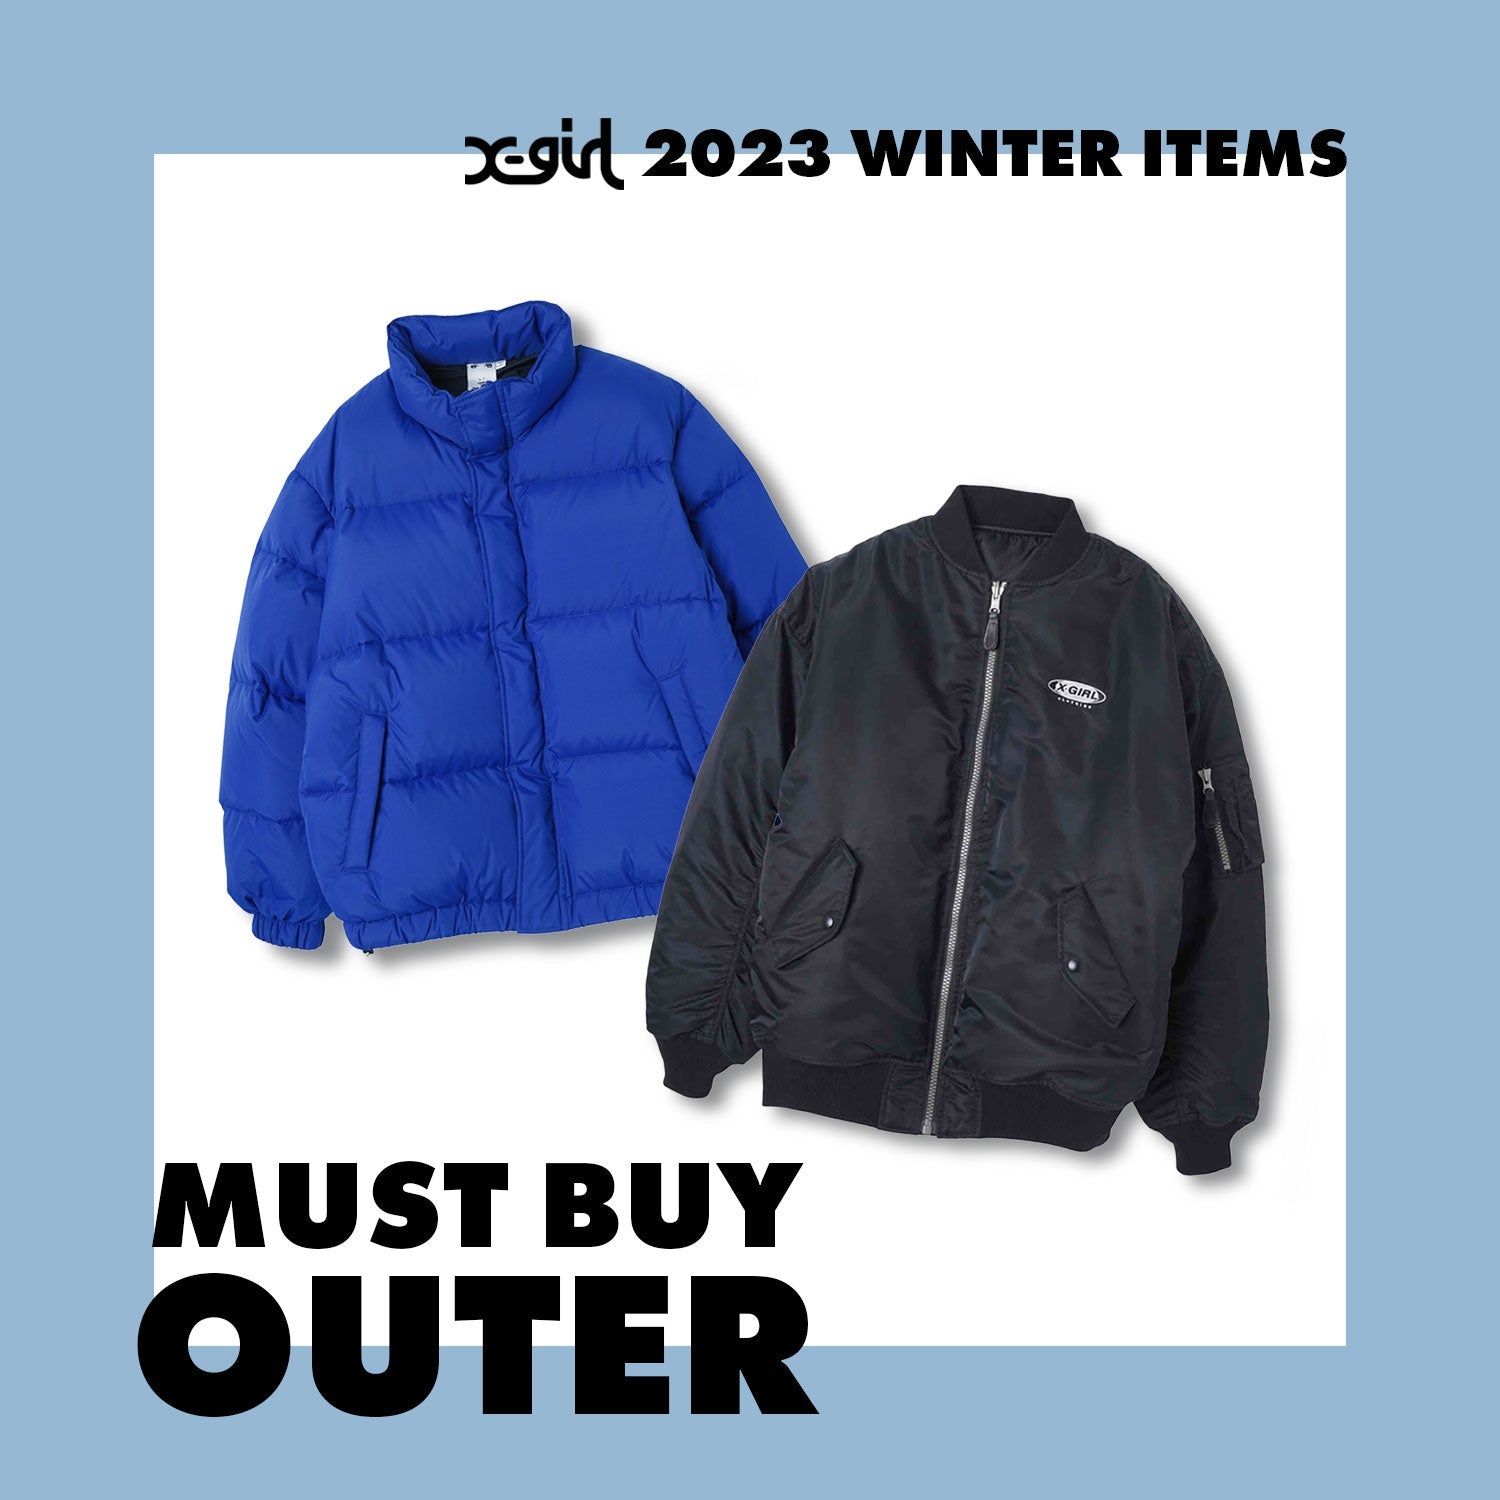 MUST BUY OUTER